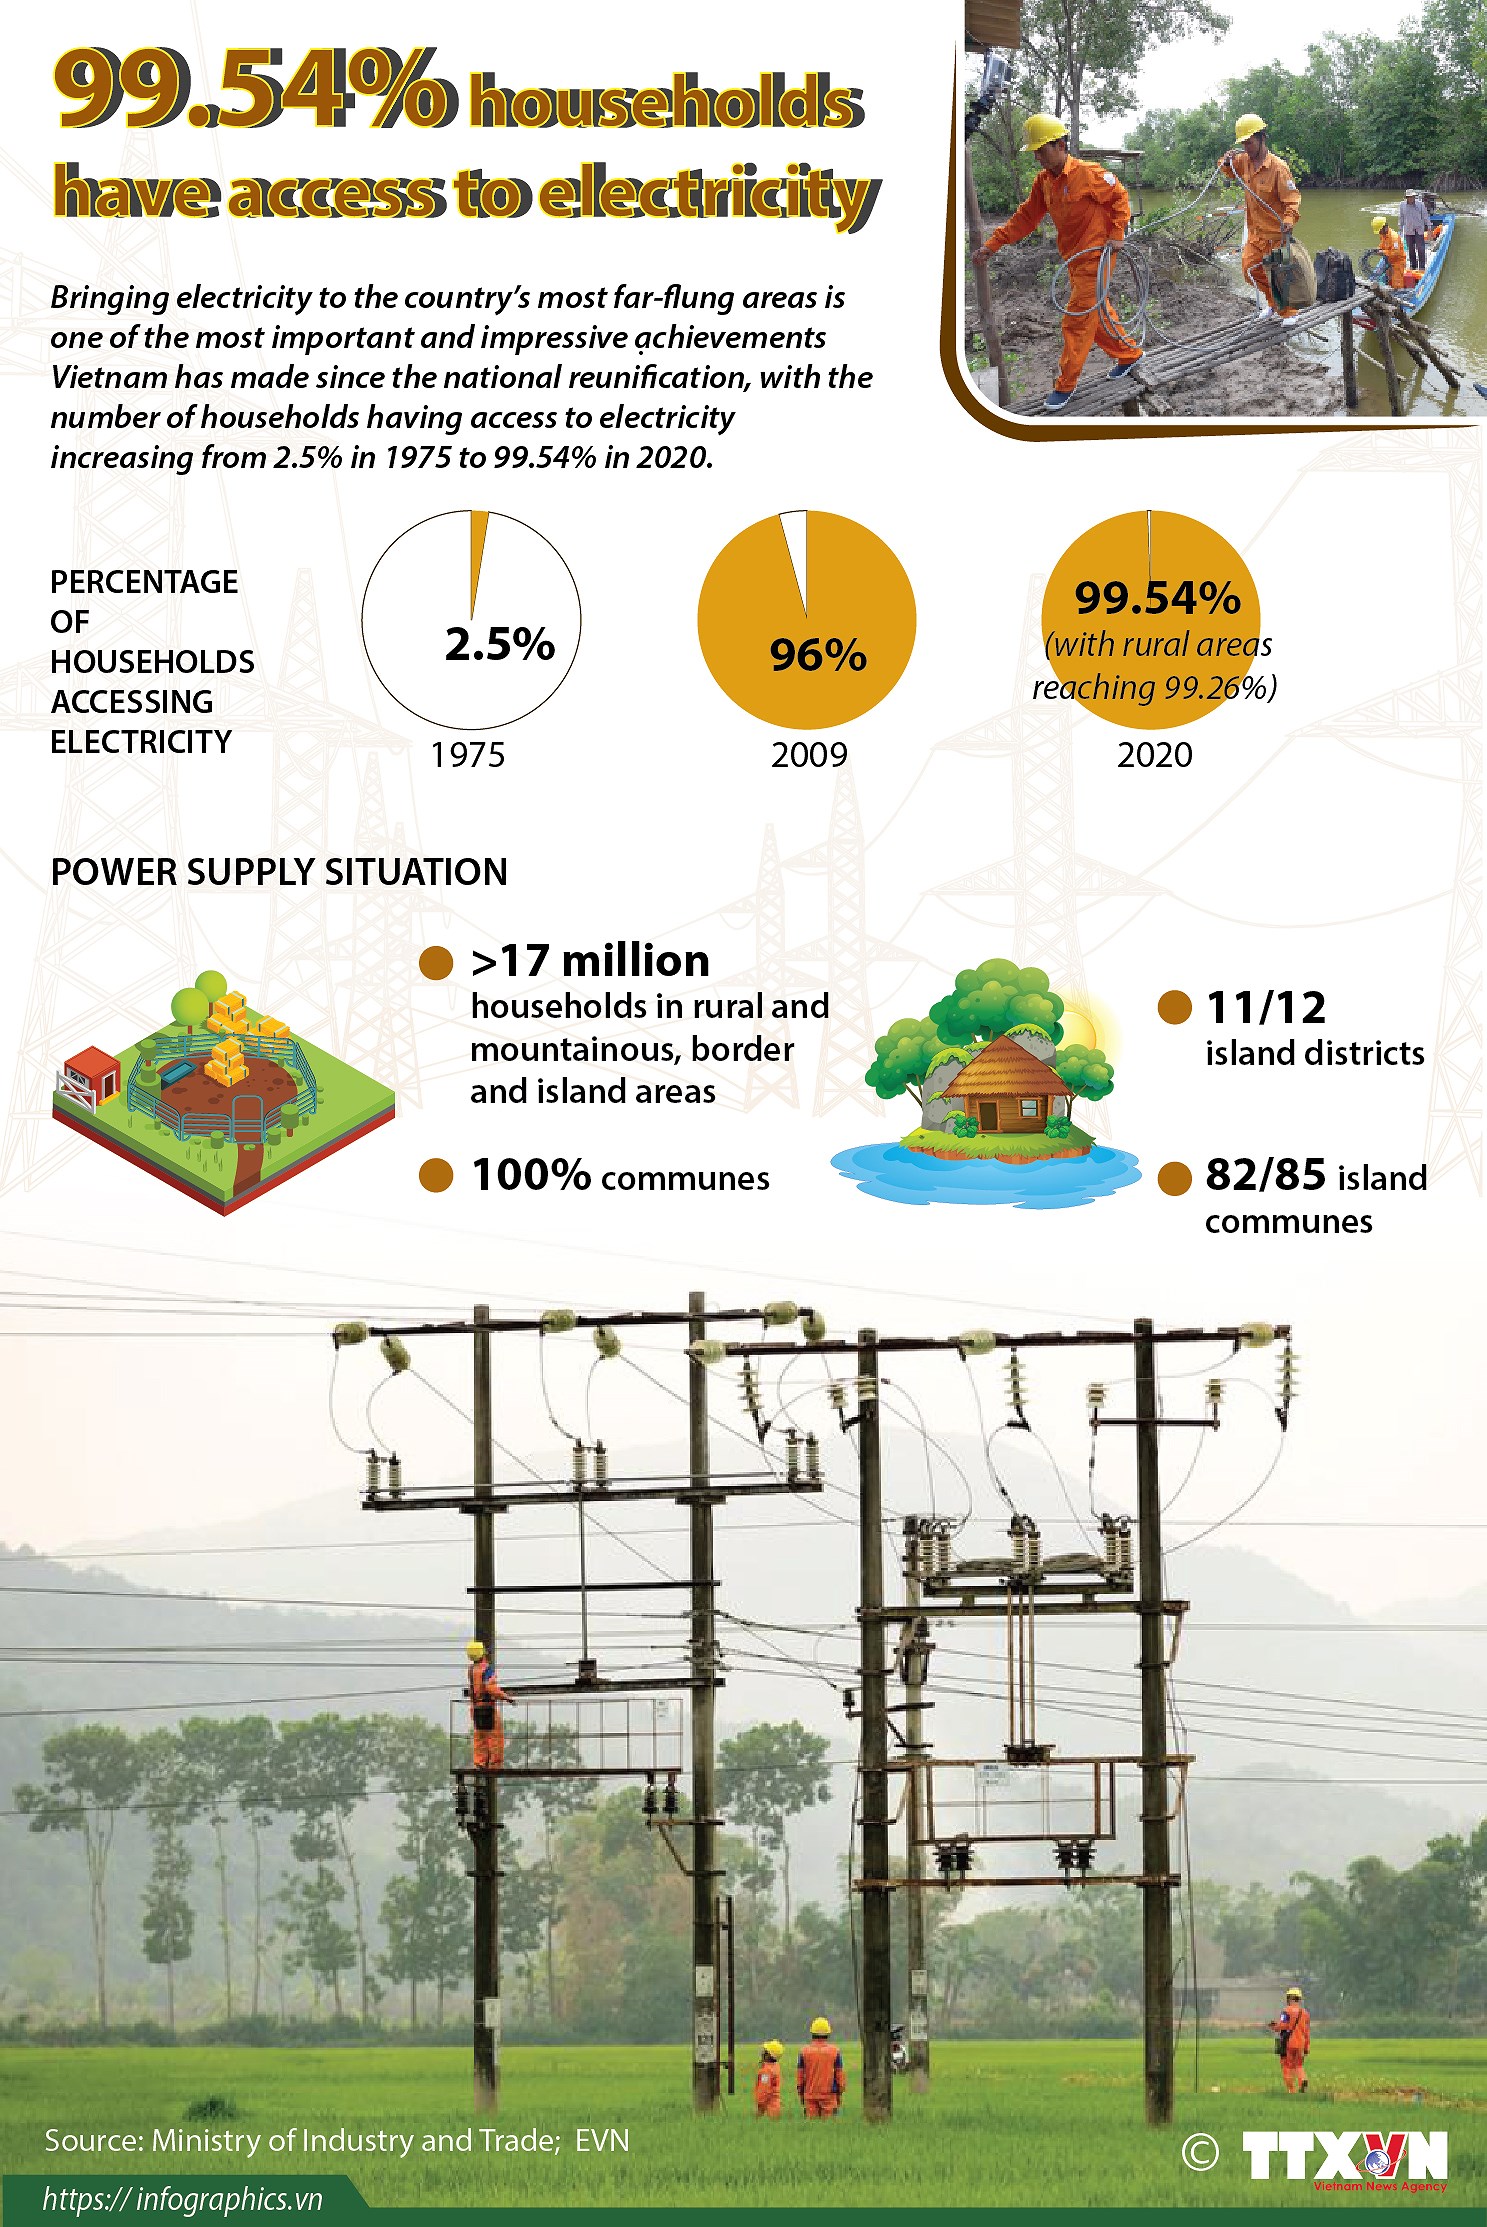 99.54% households have access to electricity hinh anh 1